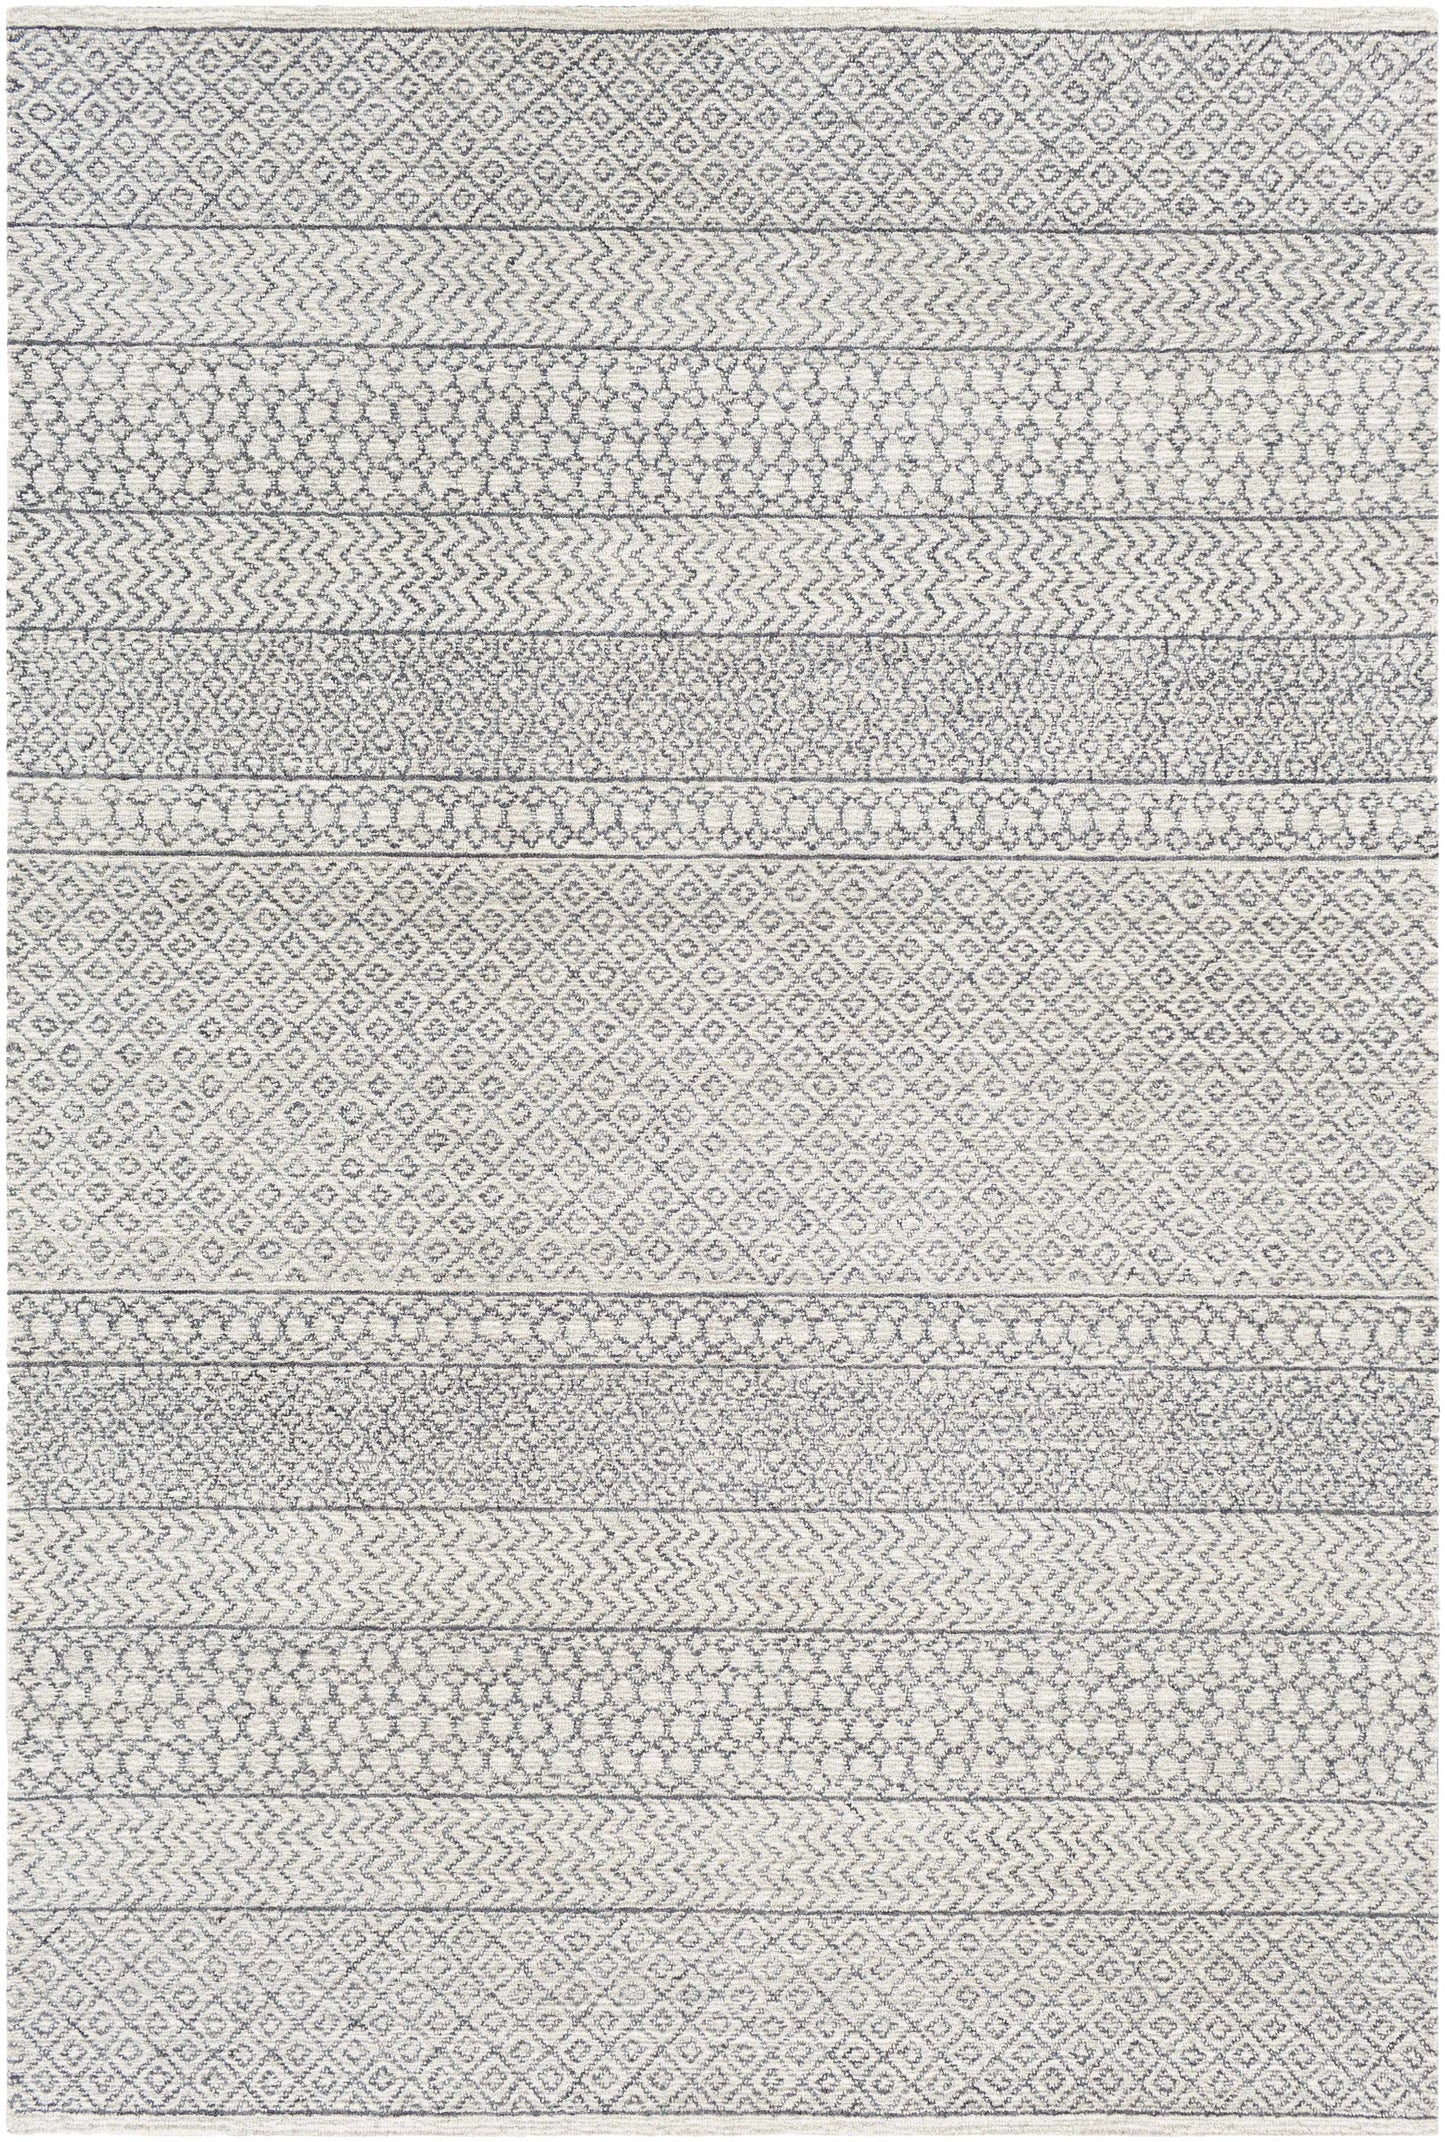 Dugway Tufted Wool Area Rug.